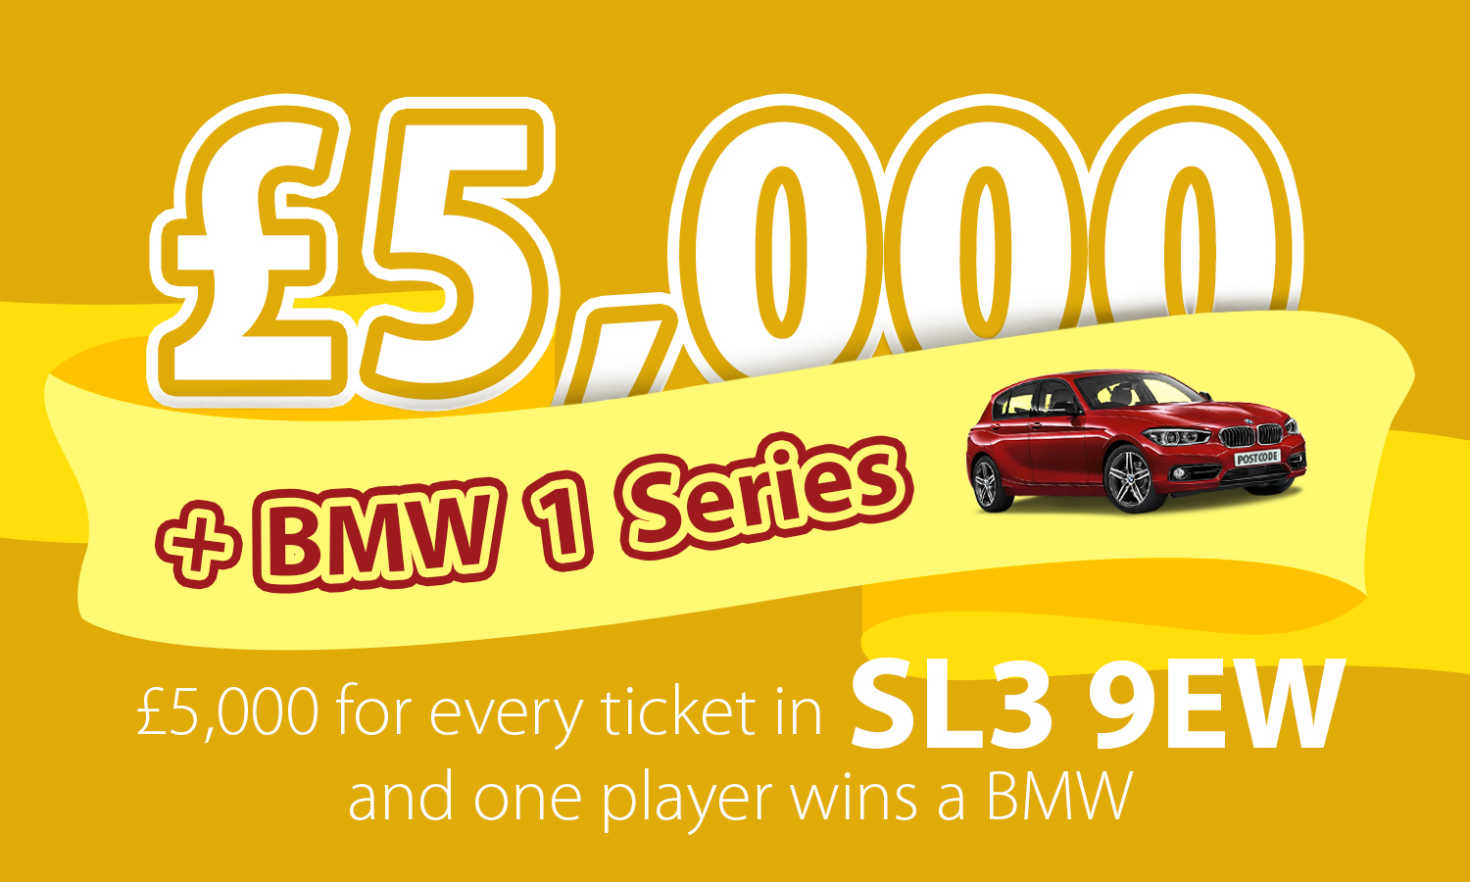 Every player in SL3 9EW wins a fantastic £5,000, and one lucky player also receives a brand new BMW